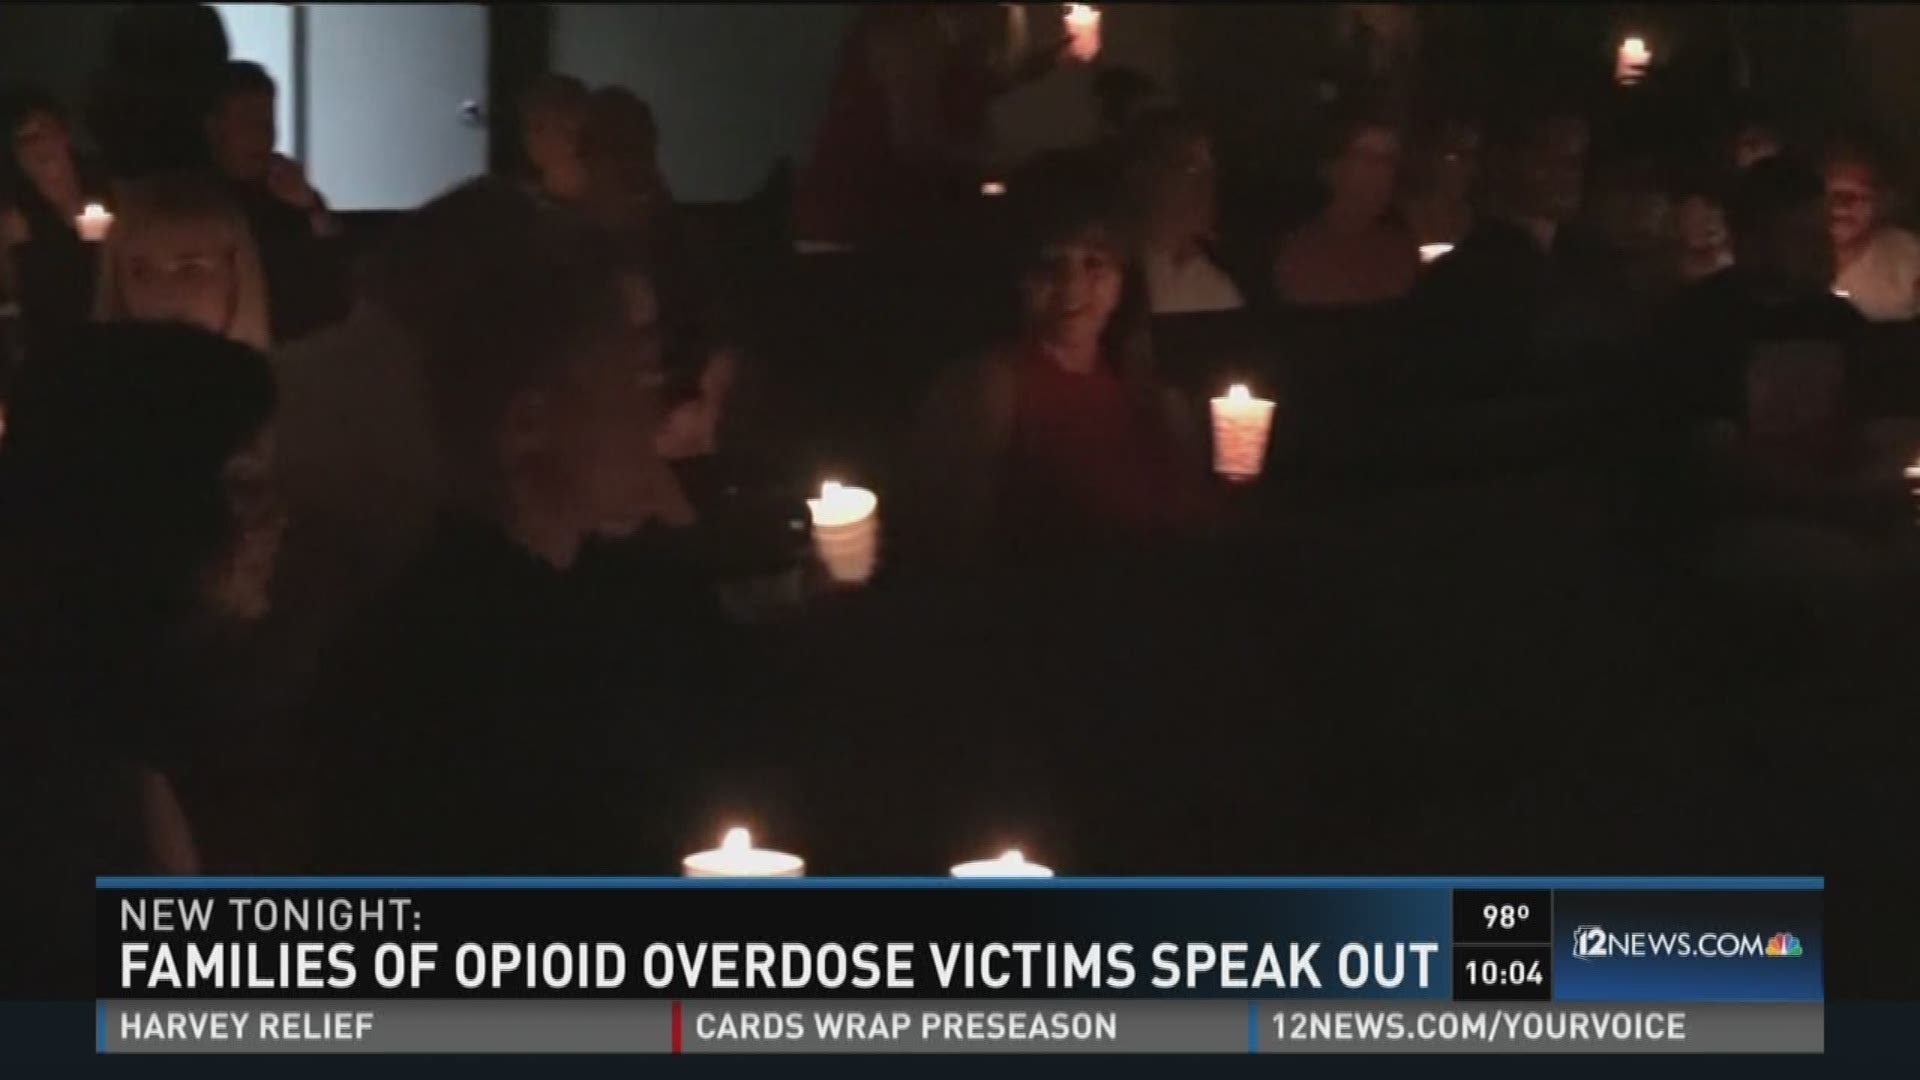 Families and neighbors come together to remember loved ones and bring awareness to the opioid addiction crisis.